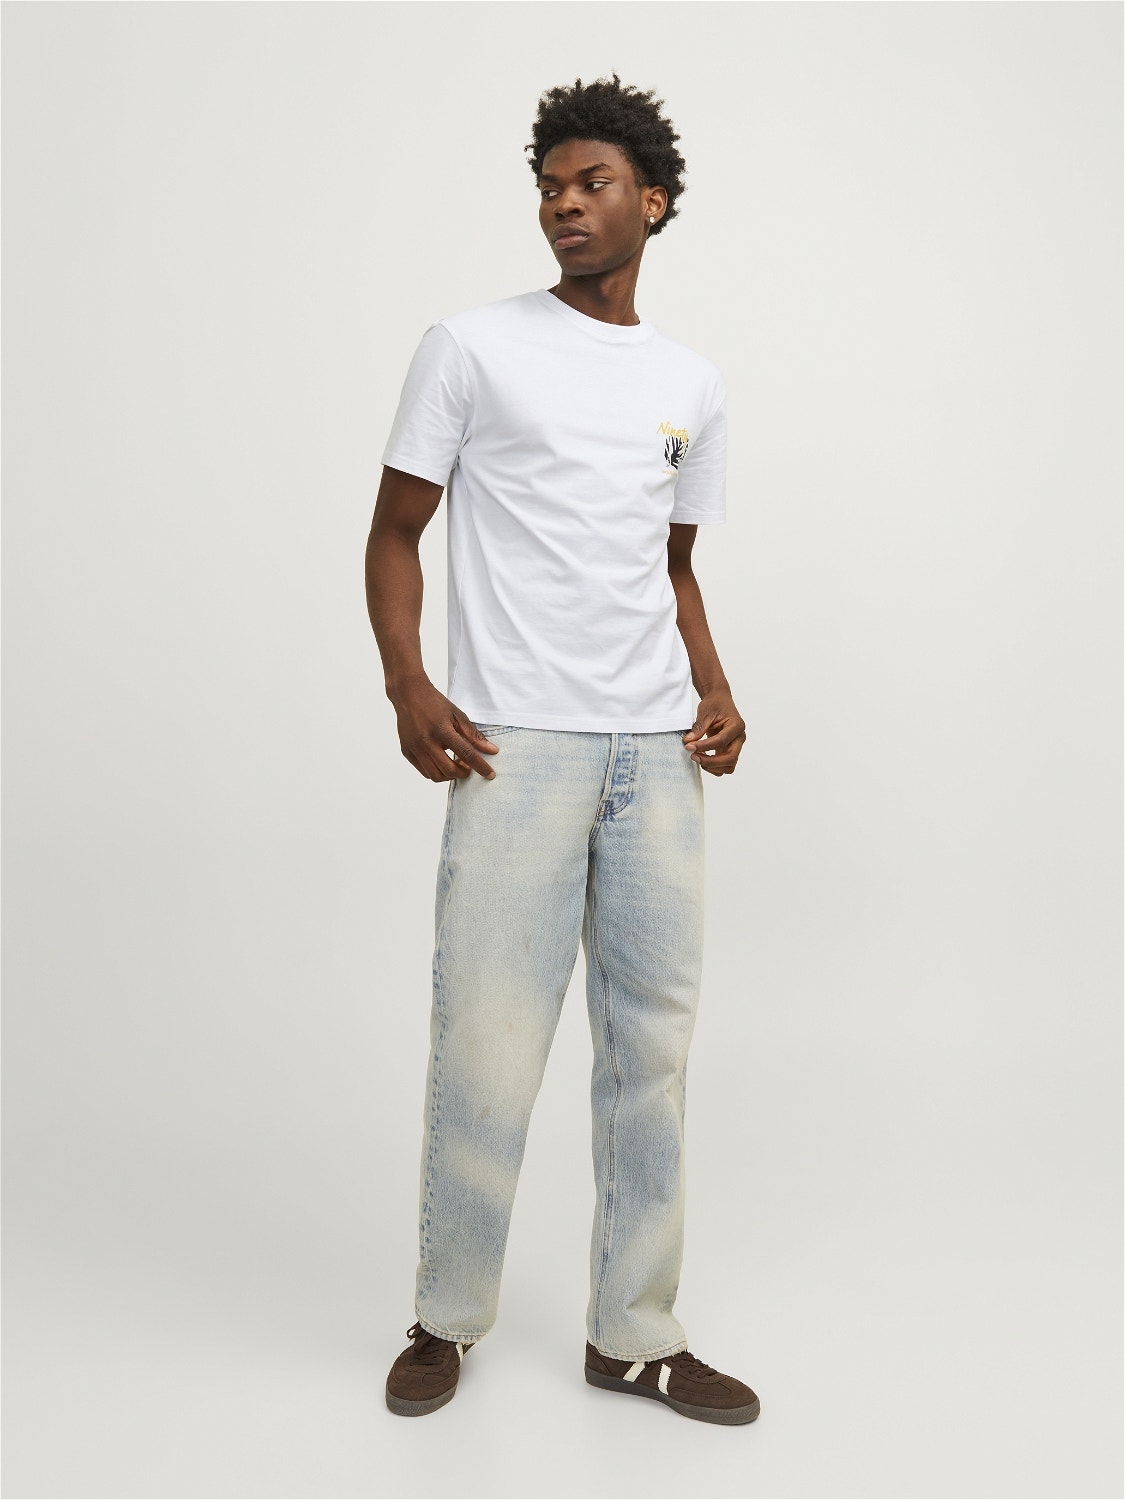 Jack & Jones Relaxed Fit Crew neck T-Shirt -Bright White - 12256540